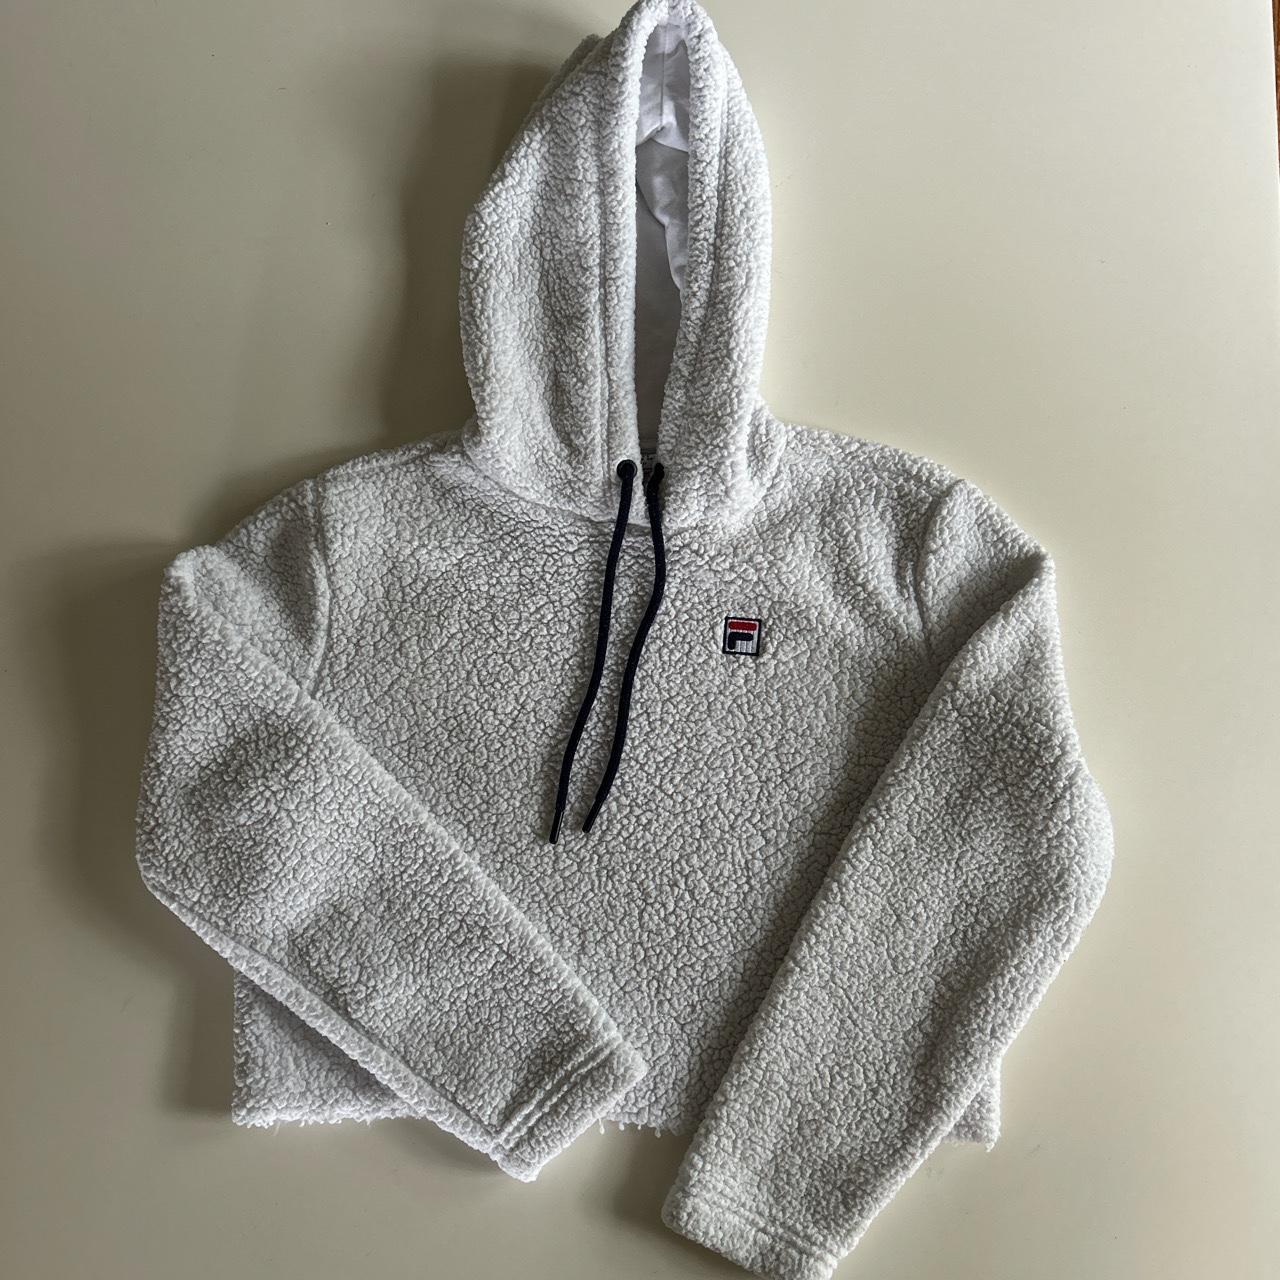 Fuzzy Fila Cropped Hoodie Size Small This was... - Depop